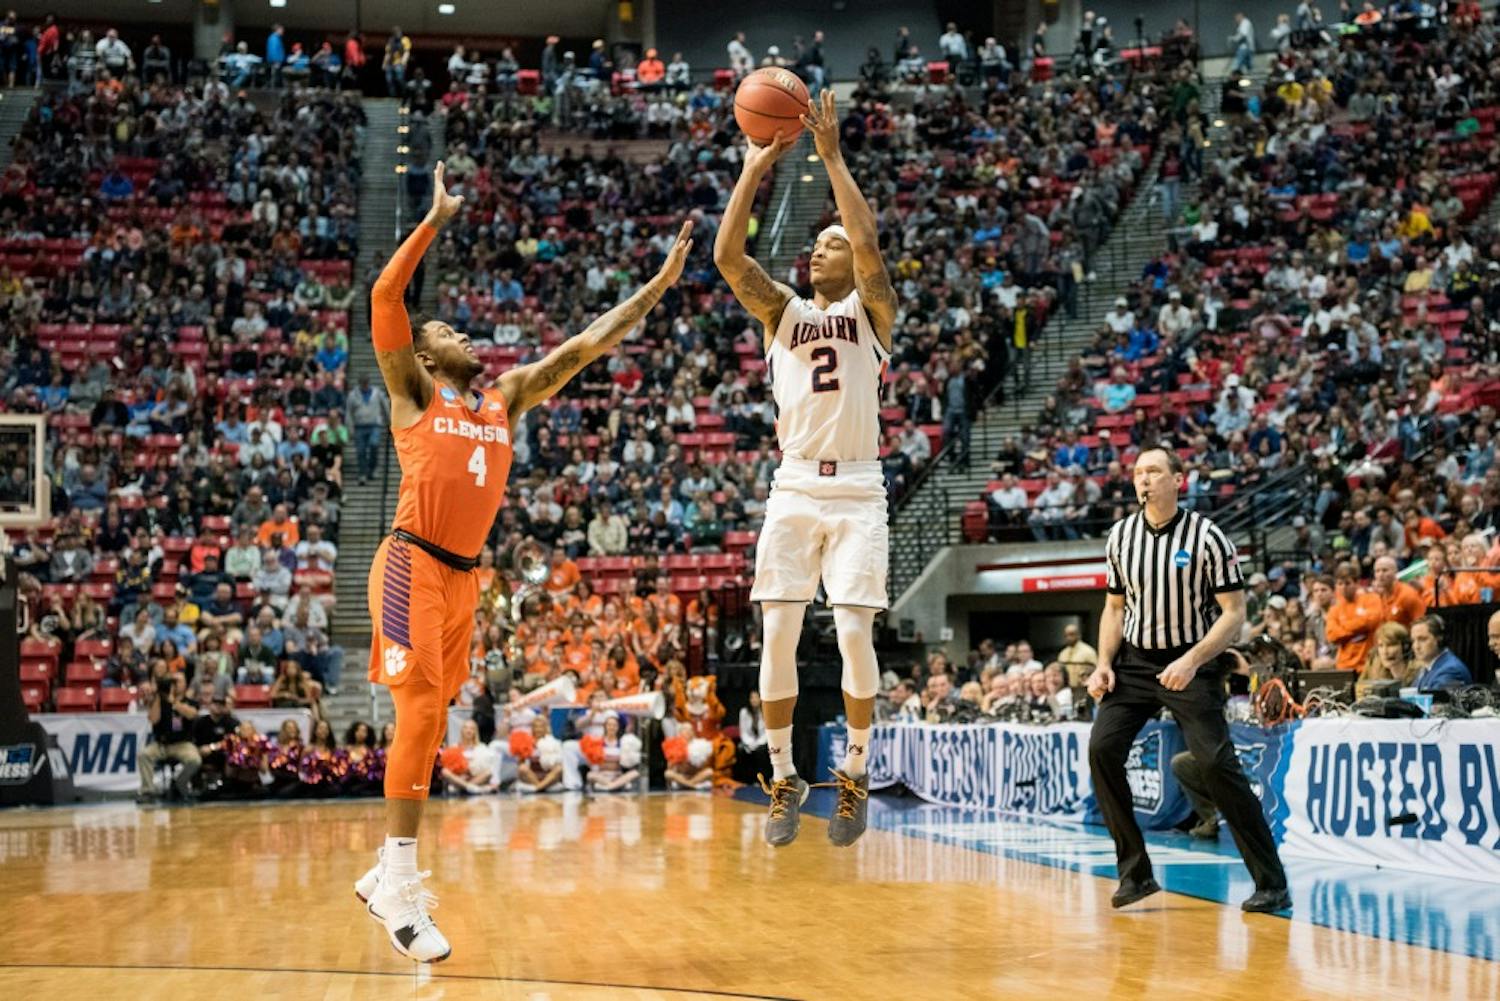 Bryce Brown (2) shoots from the 3-point line&nbsp;during Auburn basketball vs. Clemson on Sunday, March 18, 2018, at Viejas Arena in San Diego, Calif.